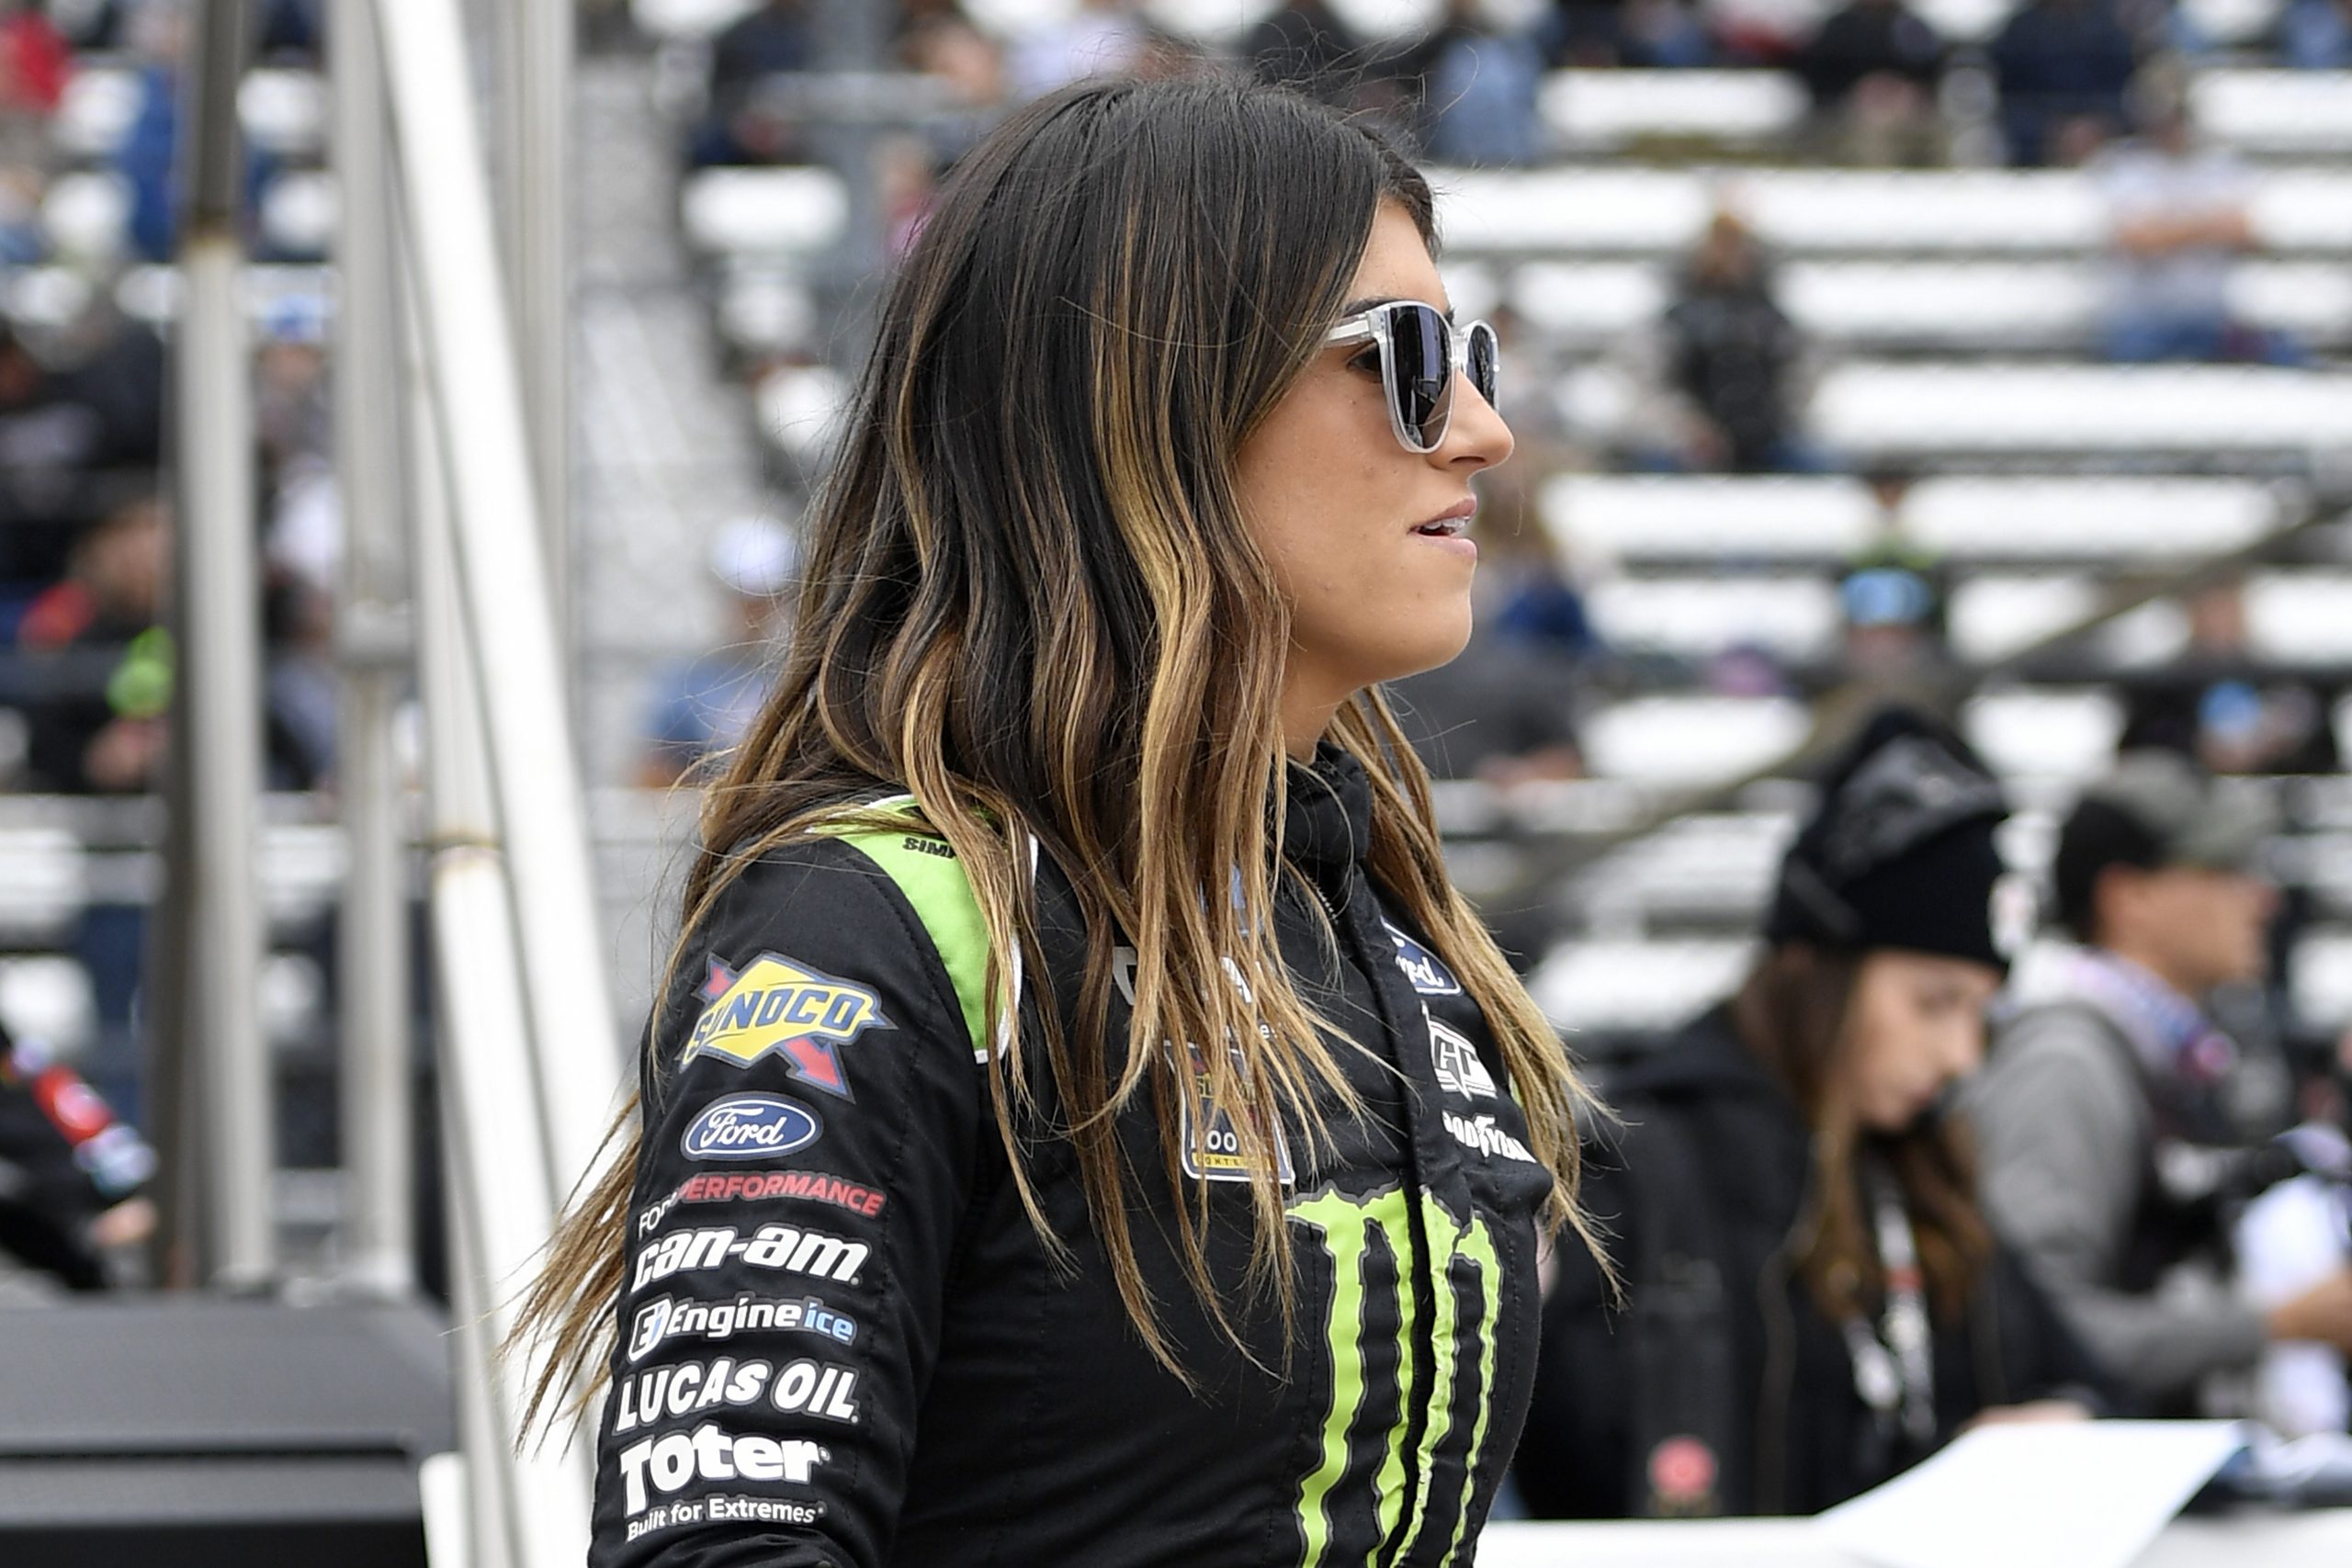 Hailie Deegan, driver of the No. 1 Ford, walks on stage during ceremonies prior to the NASCAR Camping World Truck Series United Rentals 200 at Martinsville Speedway on Oct. 30, 2021 in Martinsville, Virginia.